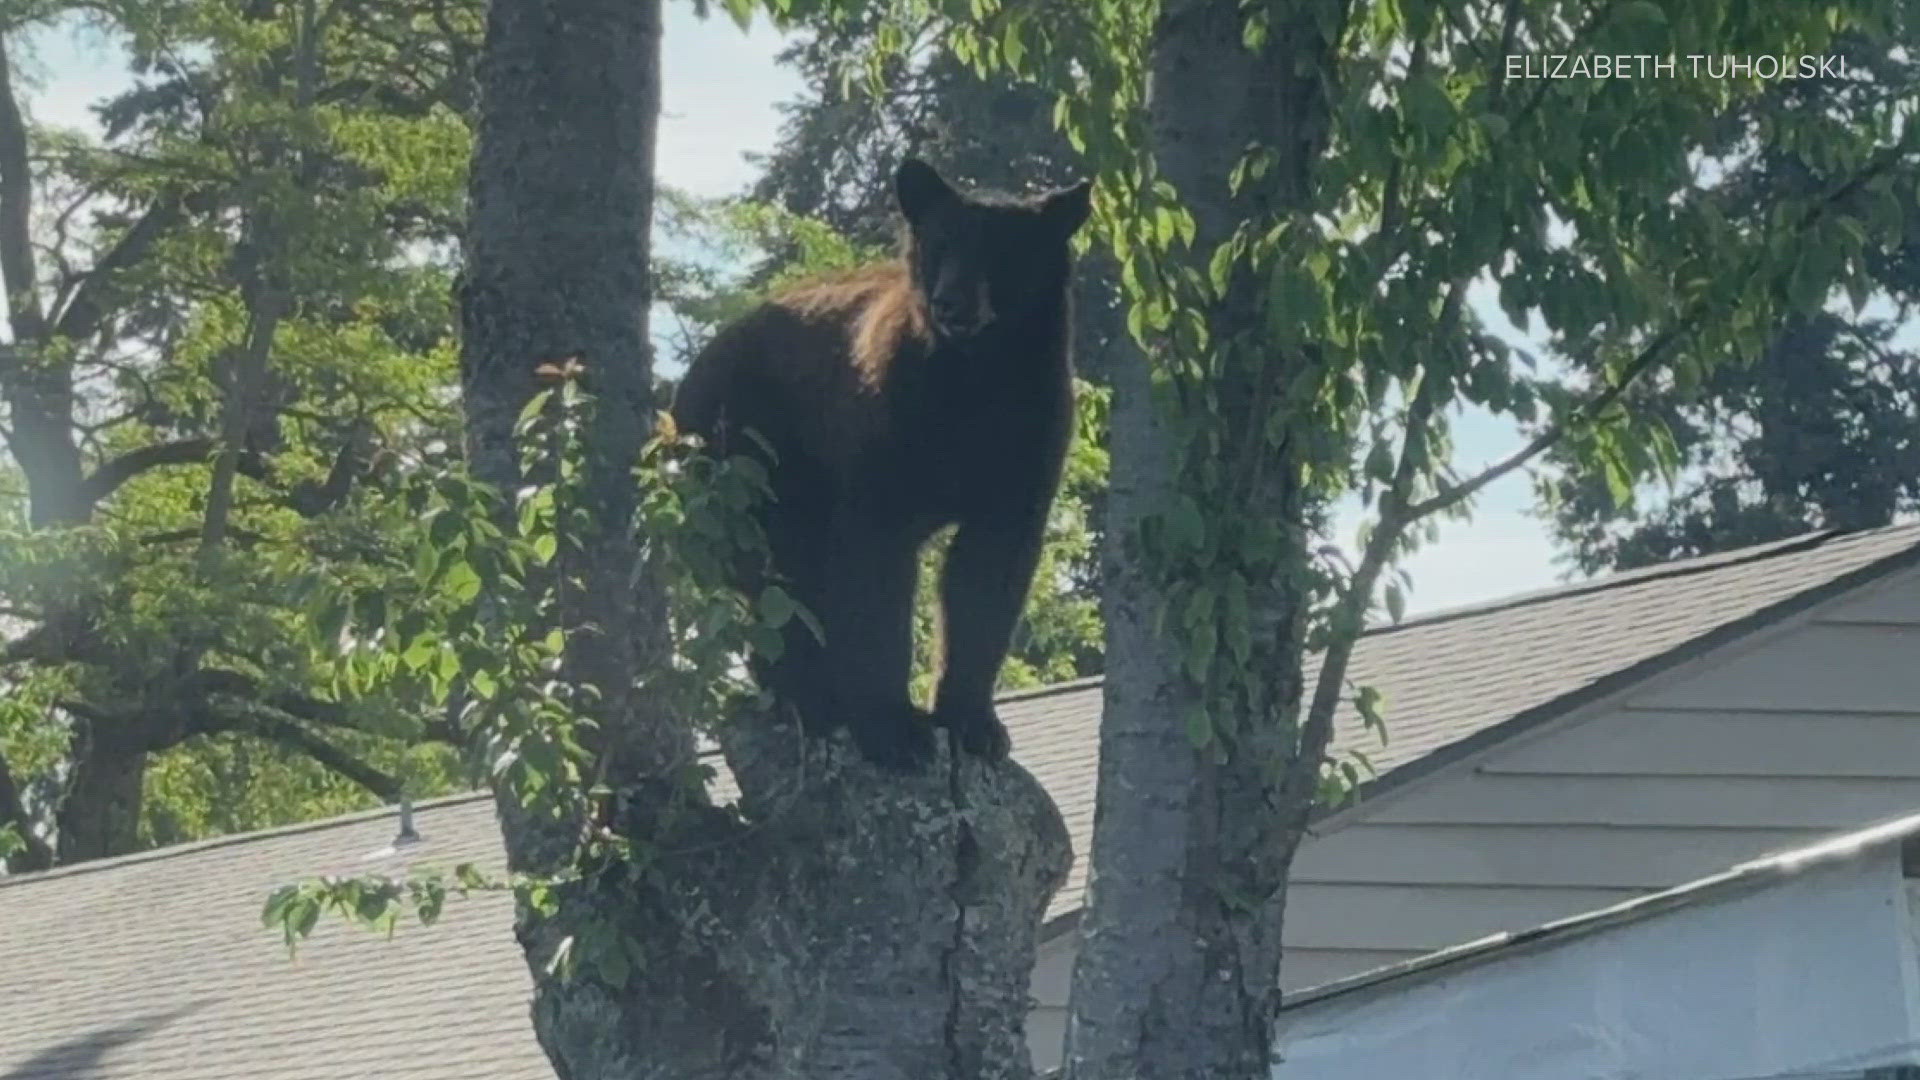 The bear was safely taken into custody, per the Washington Department of Fish and Wildlife.